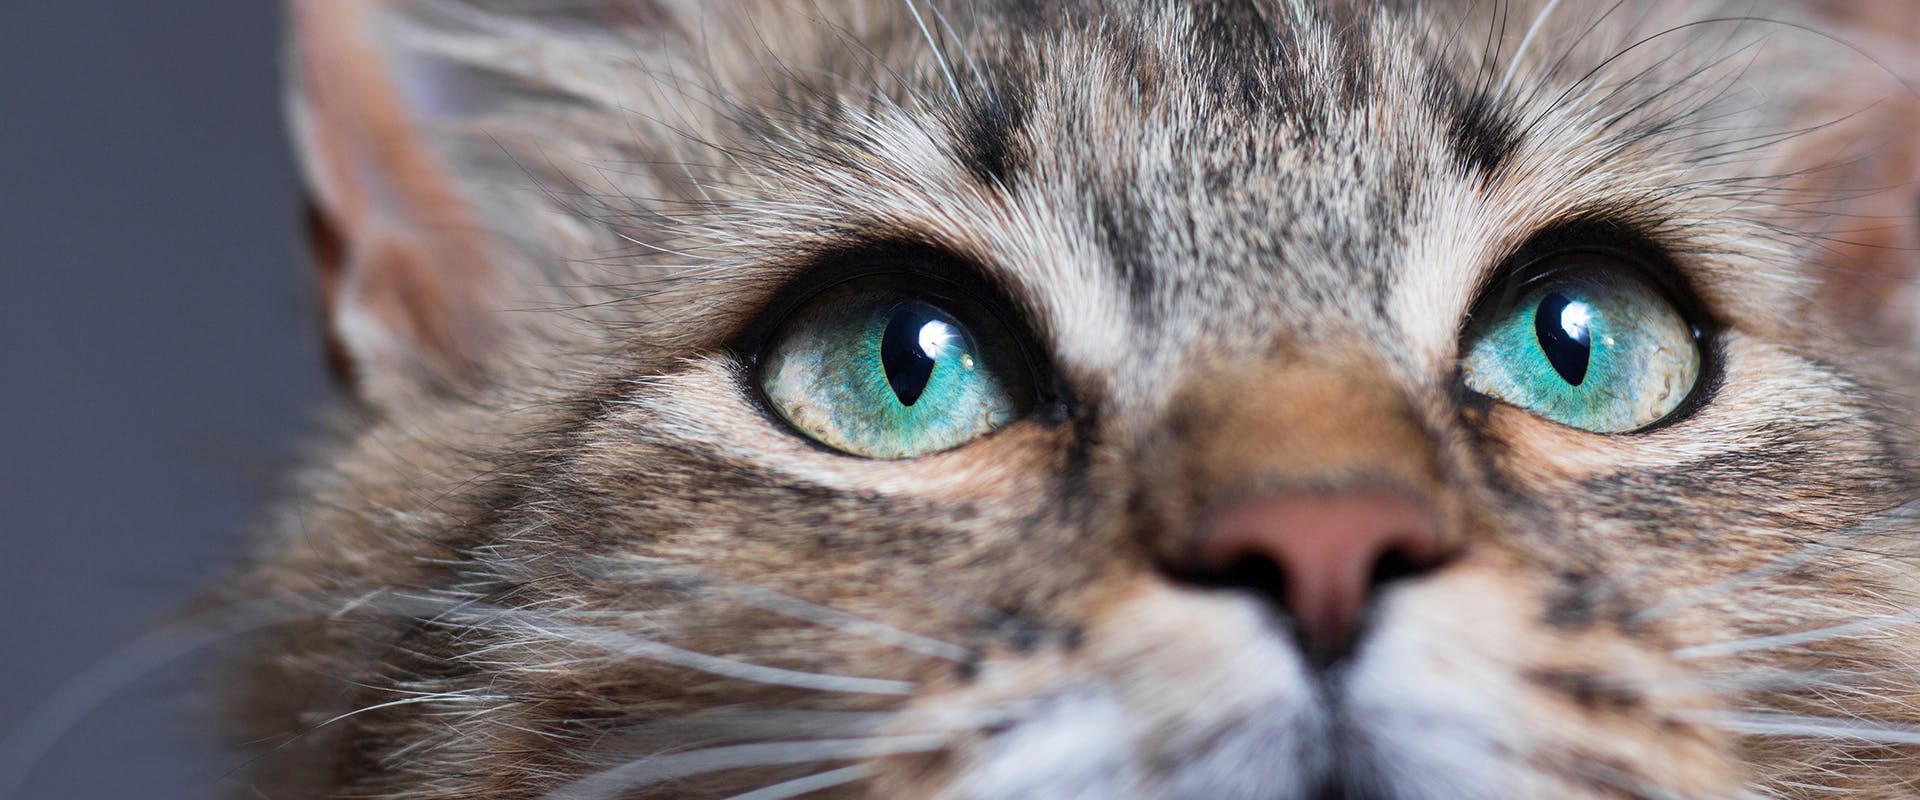 A close up of a cat's face, with slit-like pupils